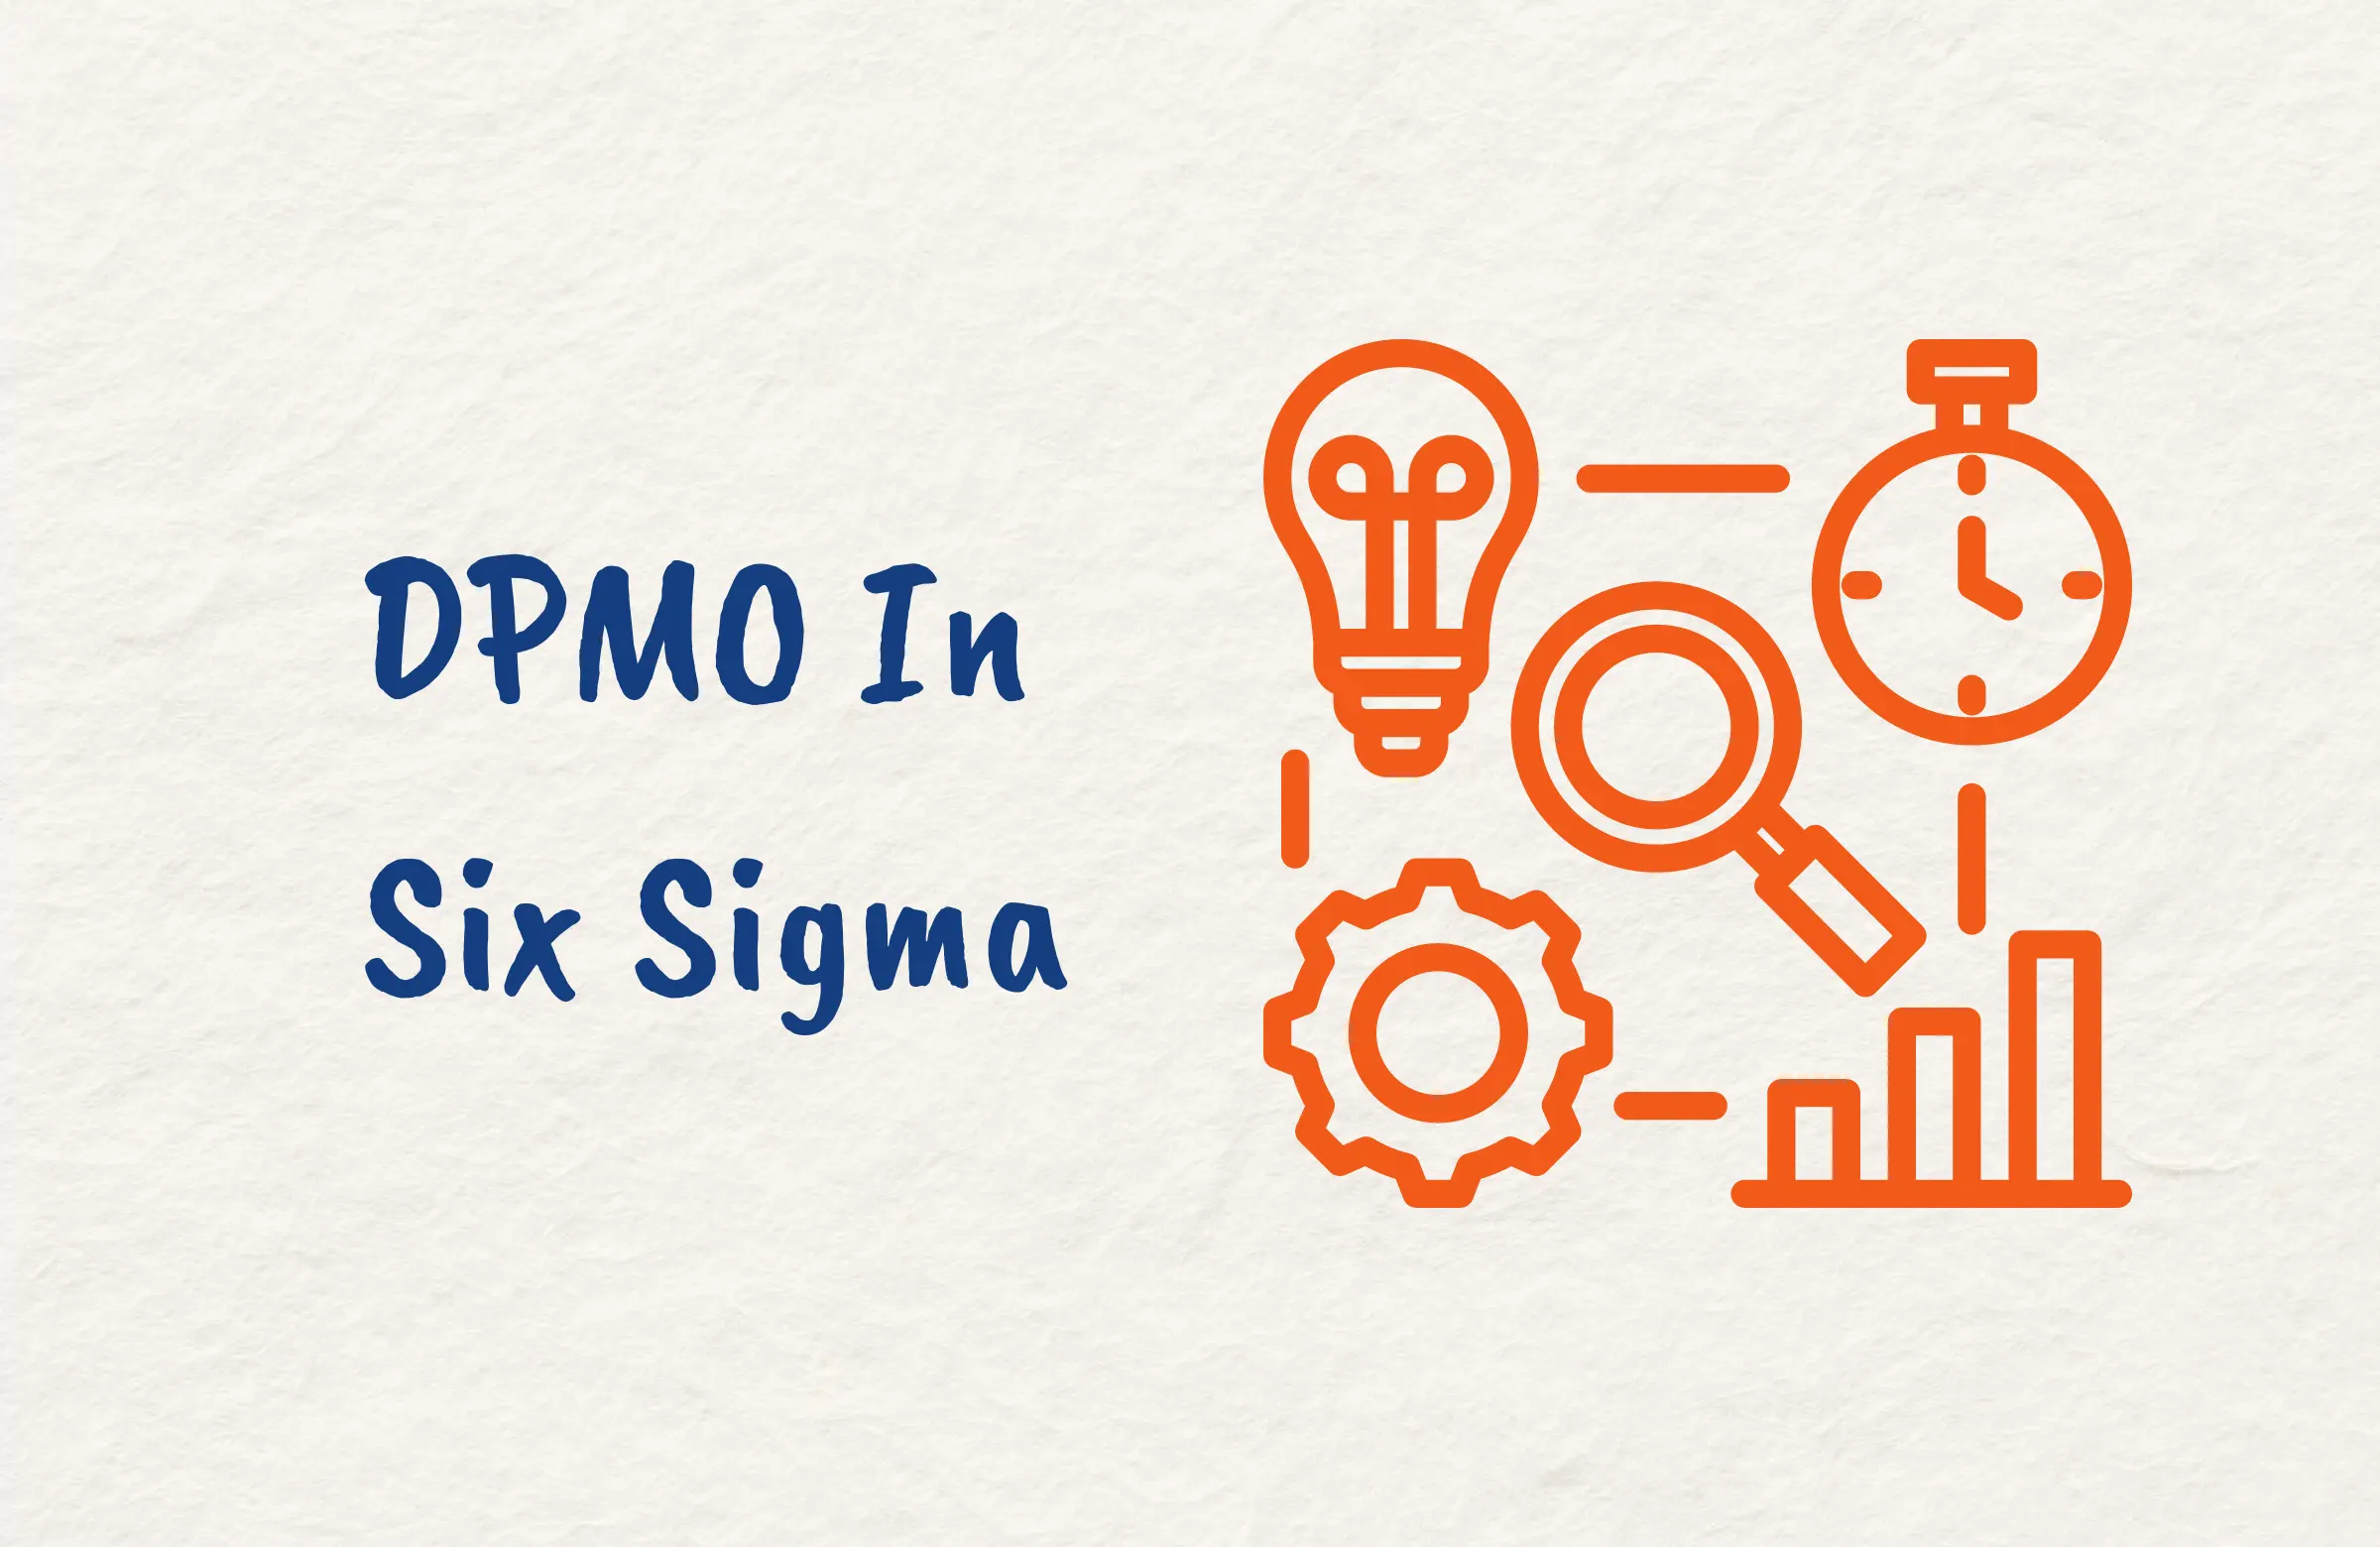 What are Defects and Opportunities in Six Sigma